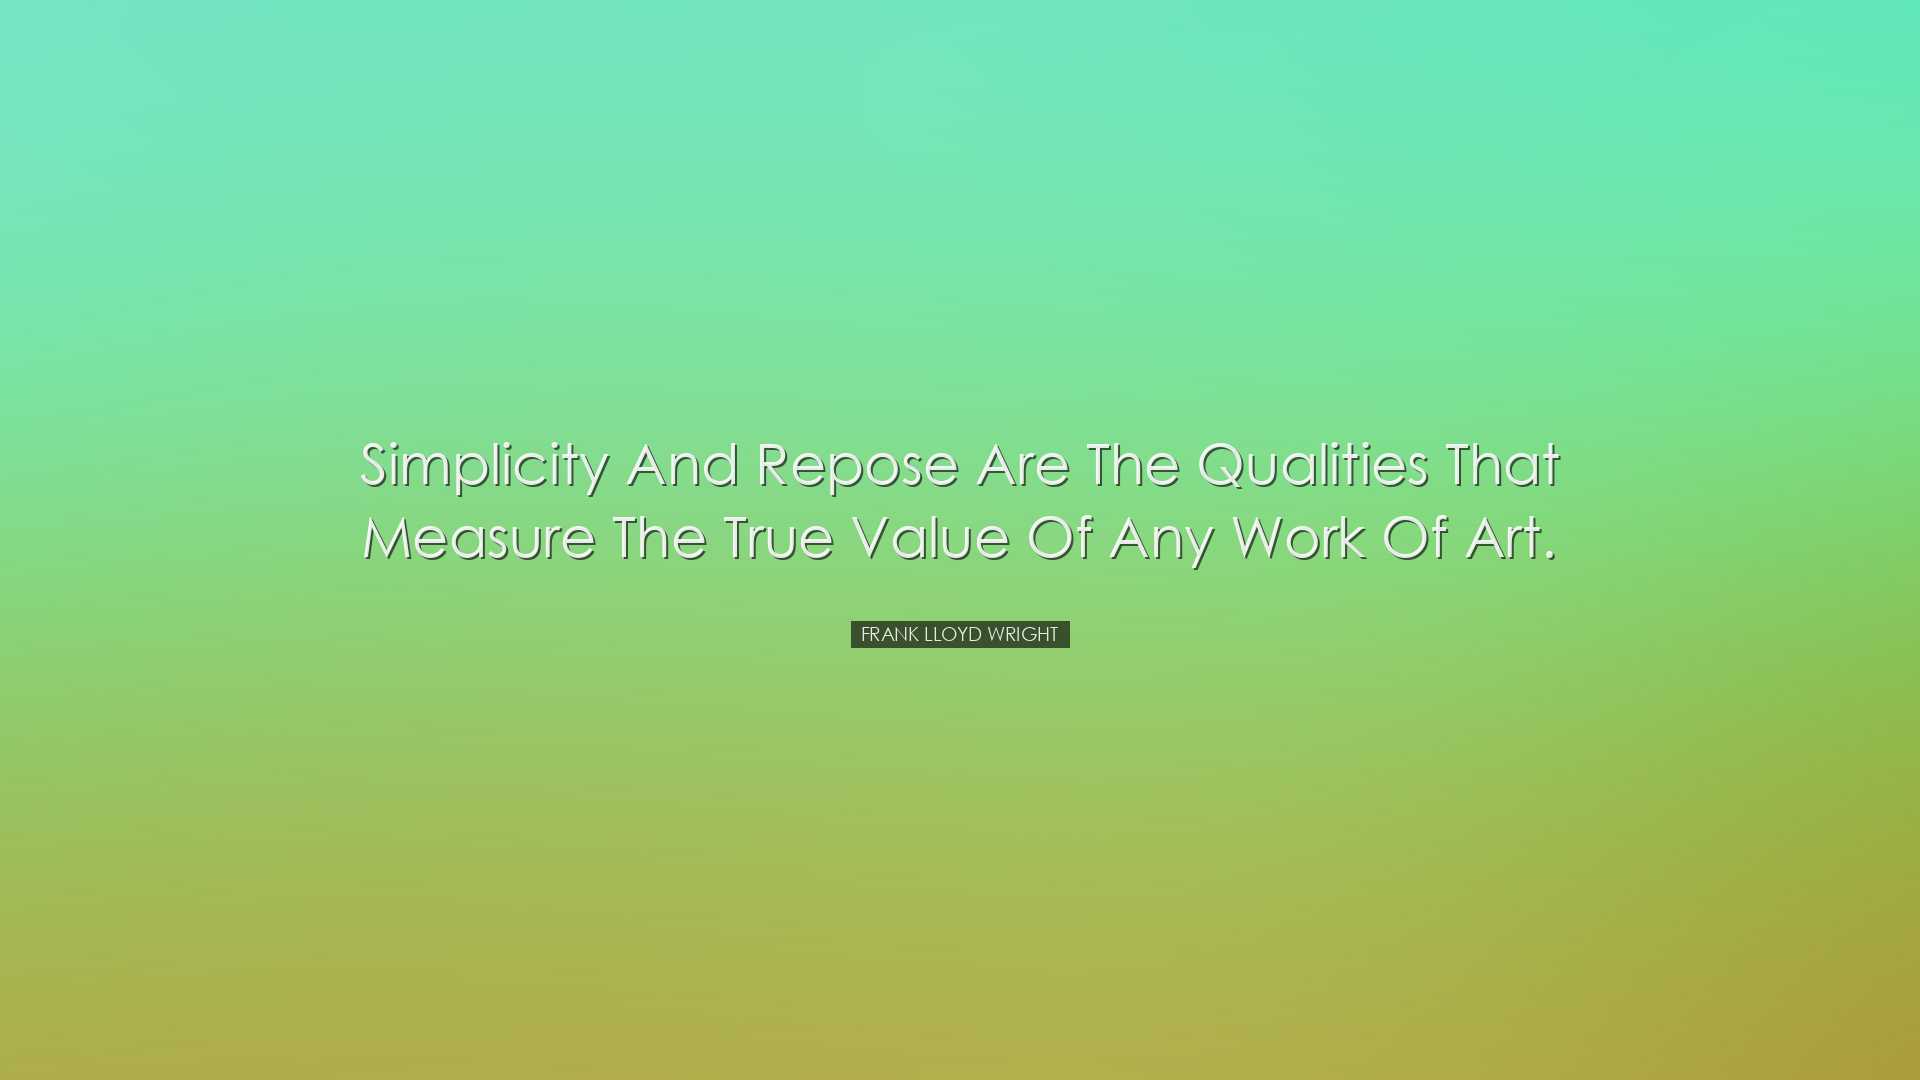 Simplicity and repose are the qualities that measure the true valu